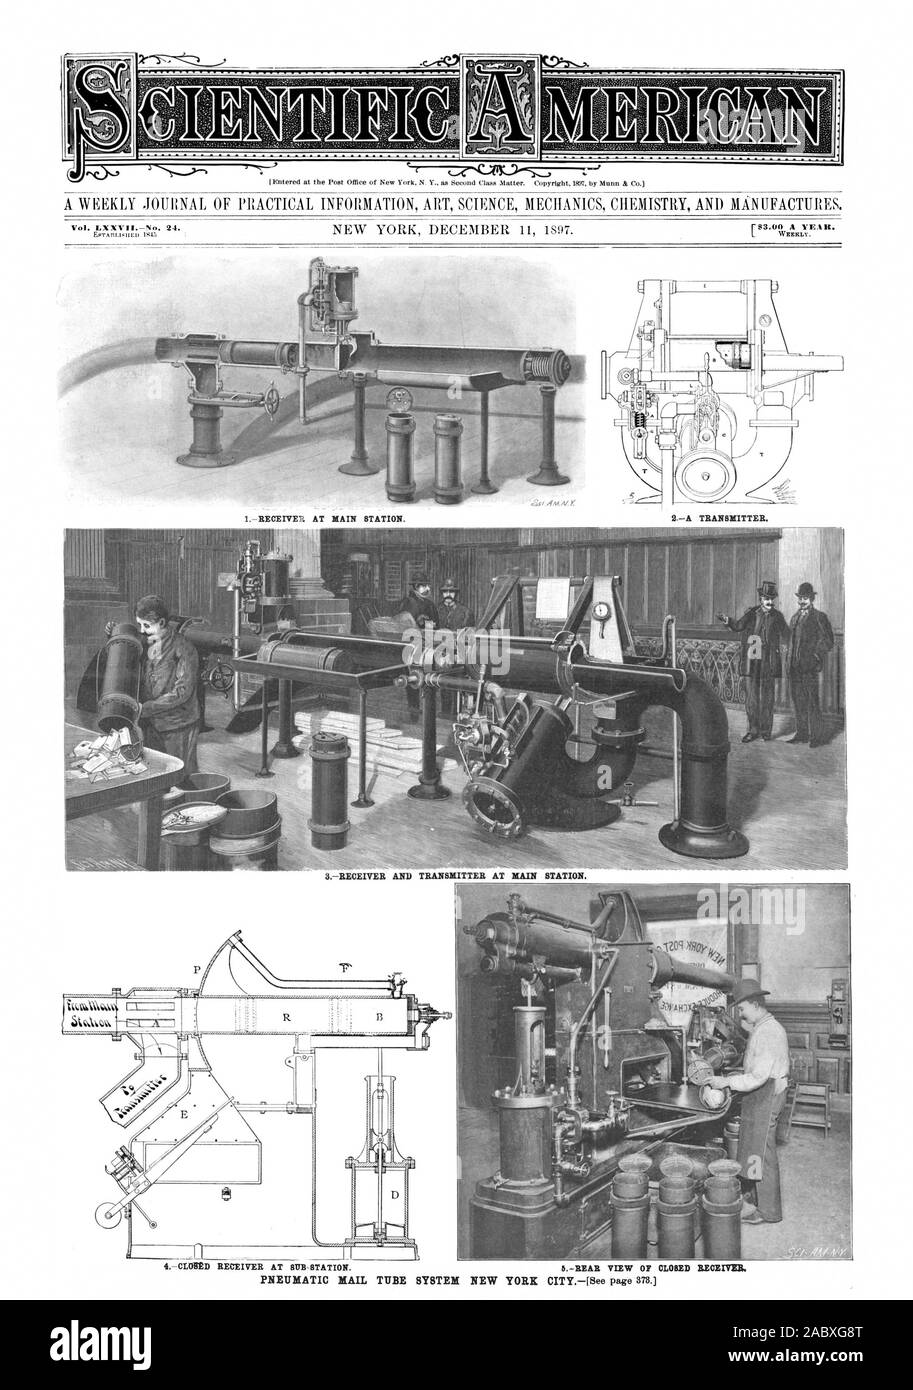 Entered at the Post Office of New York N. Y. as Second Class Matter. Copyright. 1E17 by Mann It Co. Vol. LXXVIIINo. 24. [53.00 A YEAR. IRECEIVER AT MAIN STATION. 2A TRANSMITTER. 8.-RECEIVER AND TRANSMITTER AT MAIN STATION., scientific american, 1897-12-11 Stock Photo